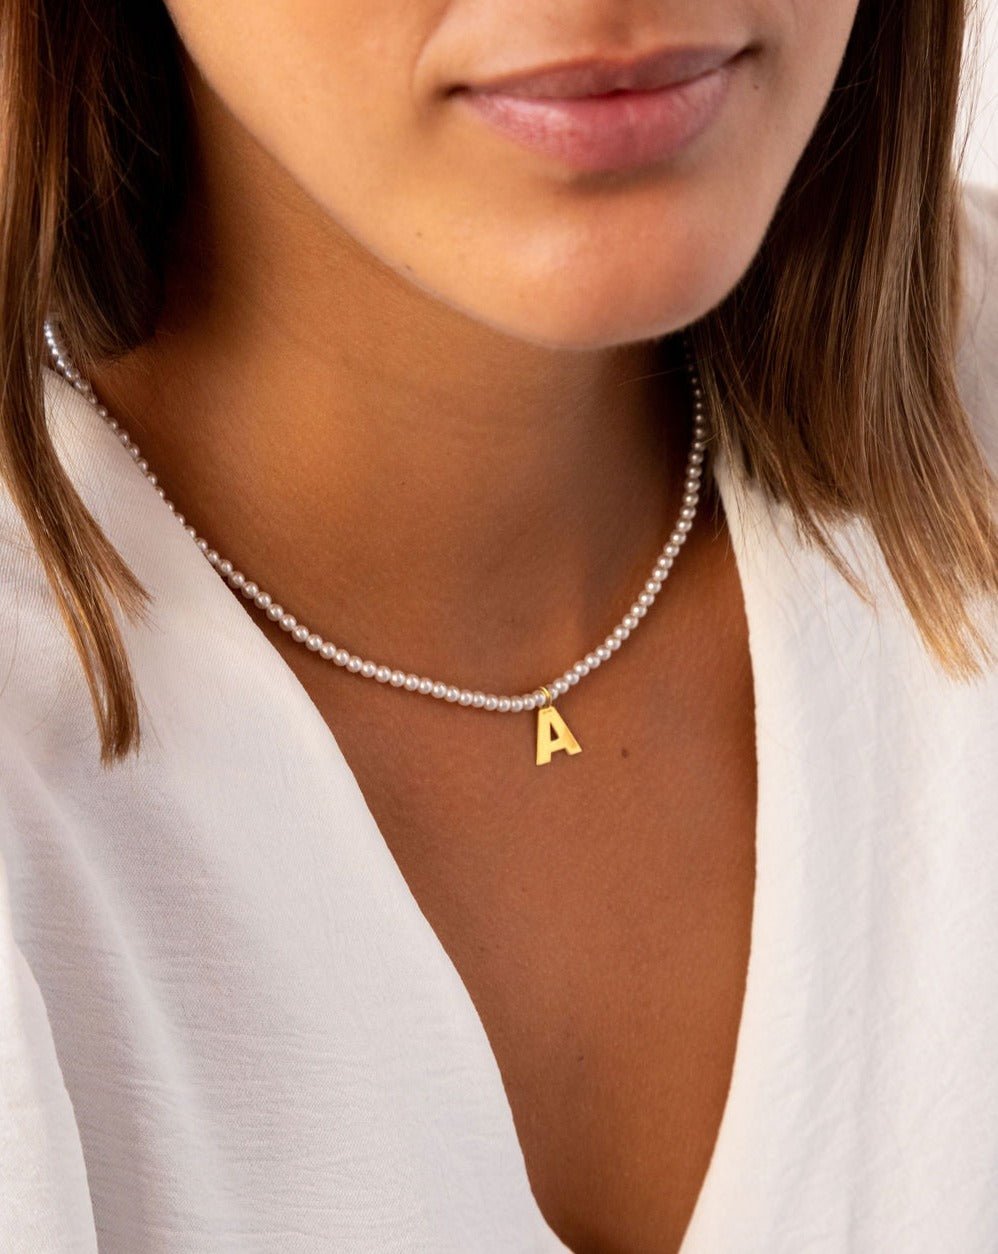 PEARL NECKLACE | INITIAL MIDI GOLD